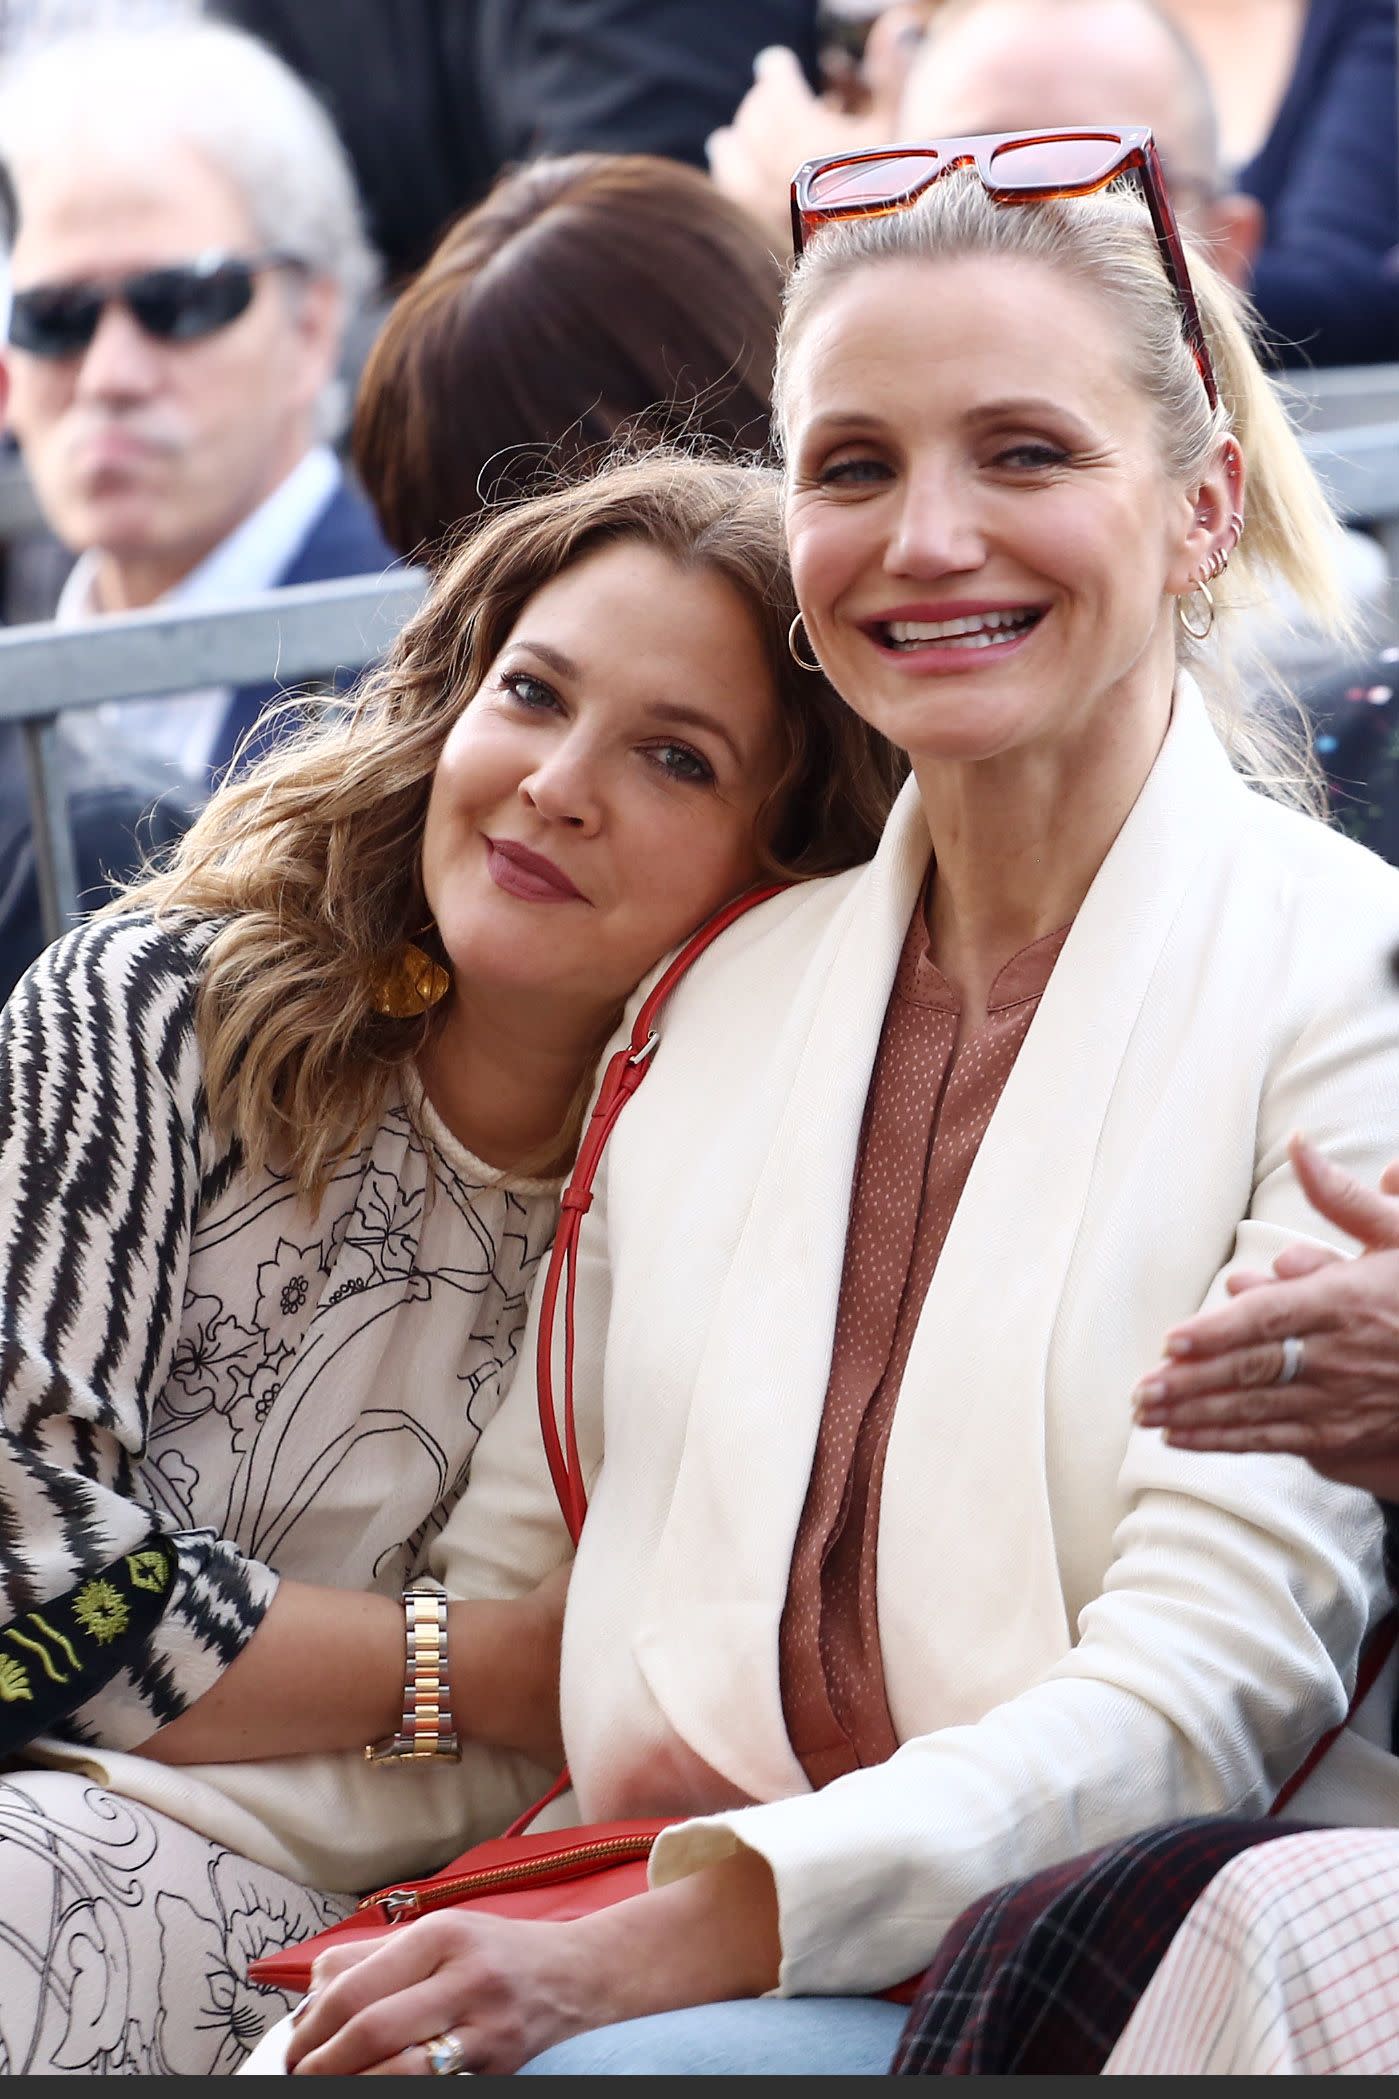 Drew Barrymore Cameron Diaz Sex - Cameron Diaz and Drew Barrymore Are BFF Goals